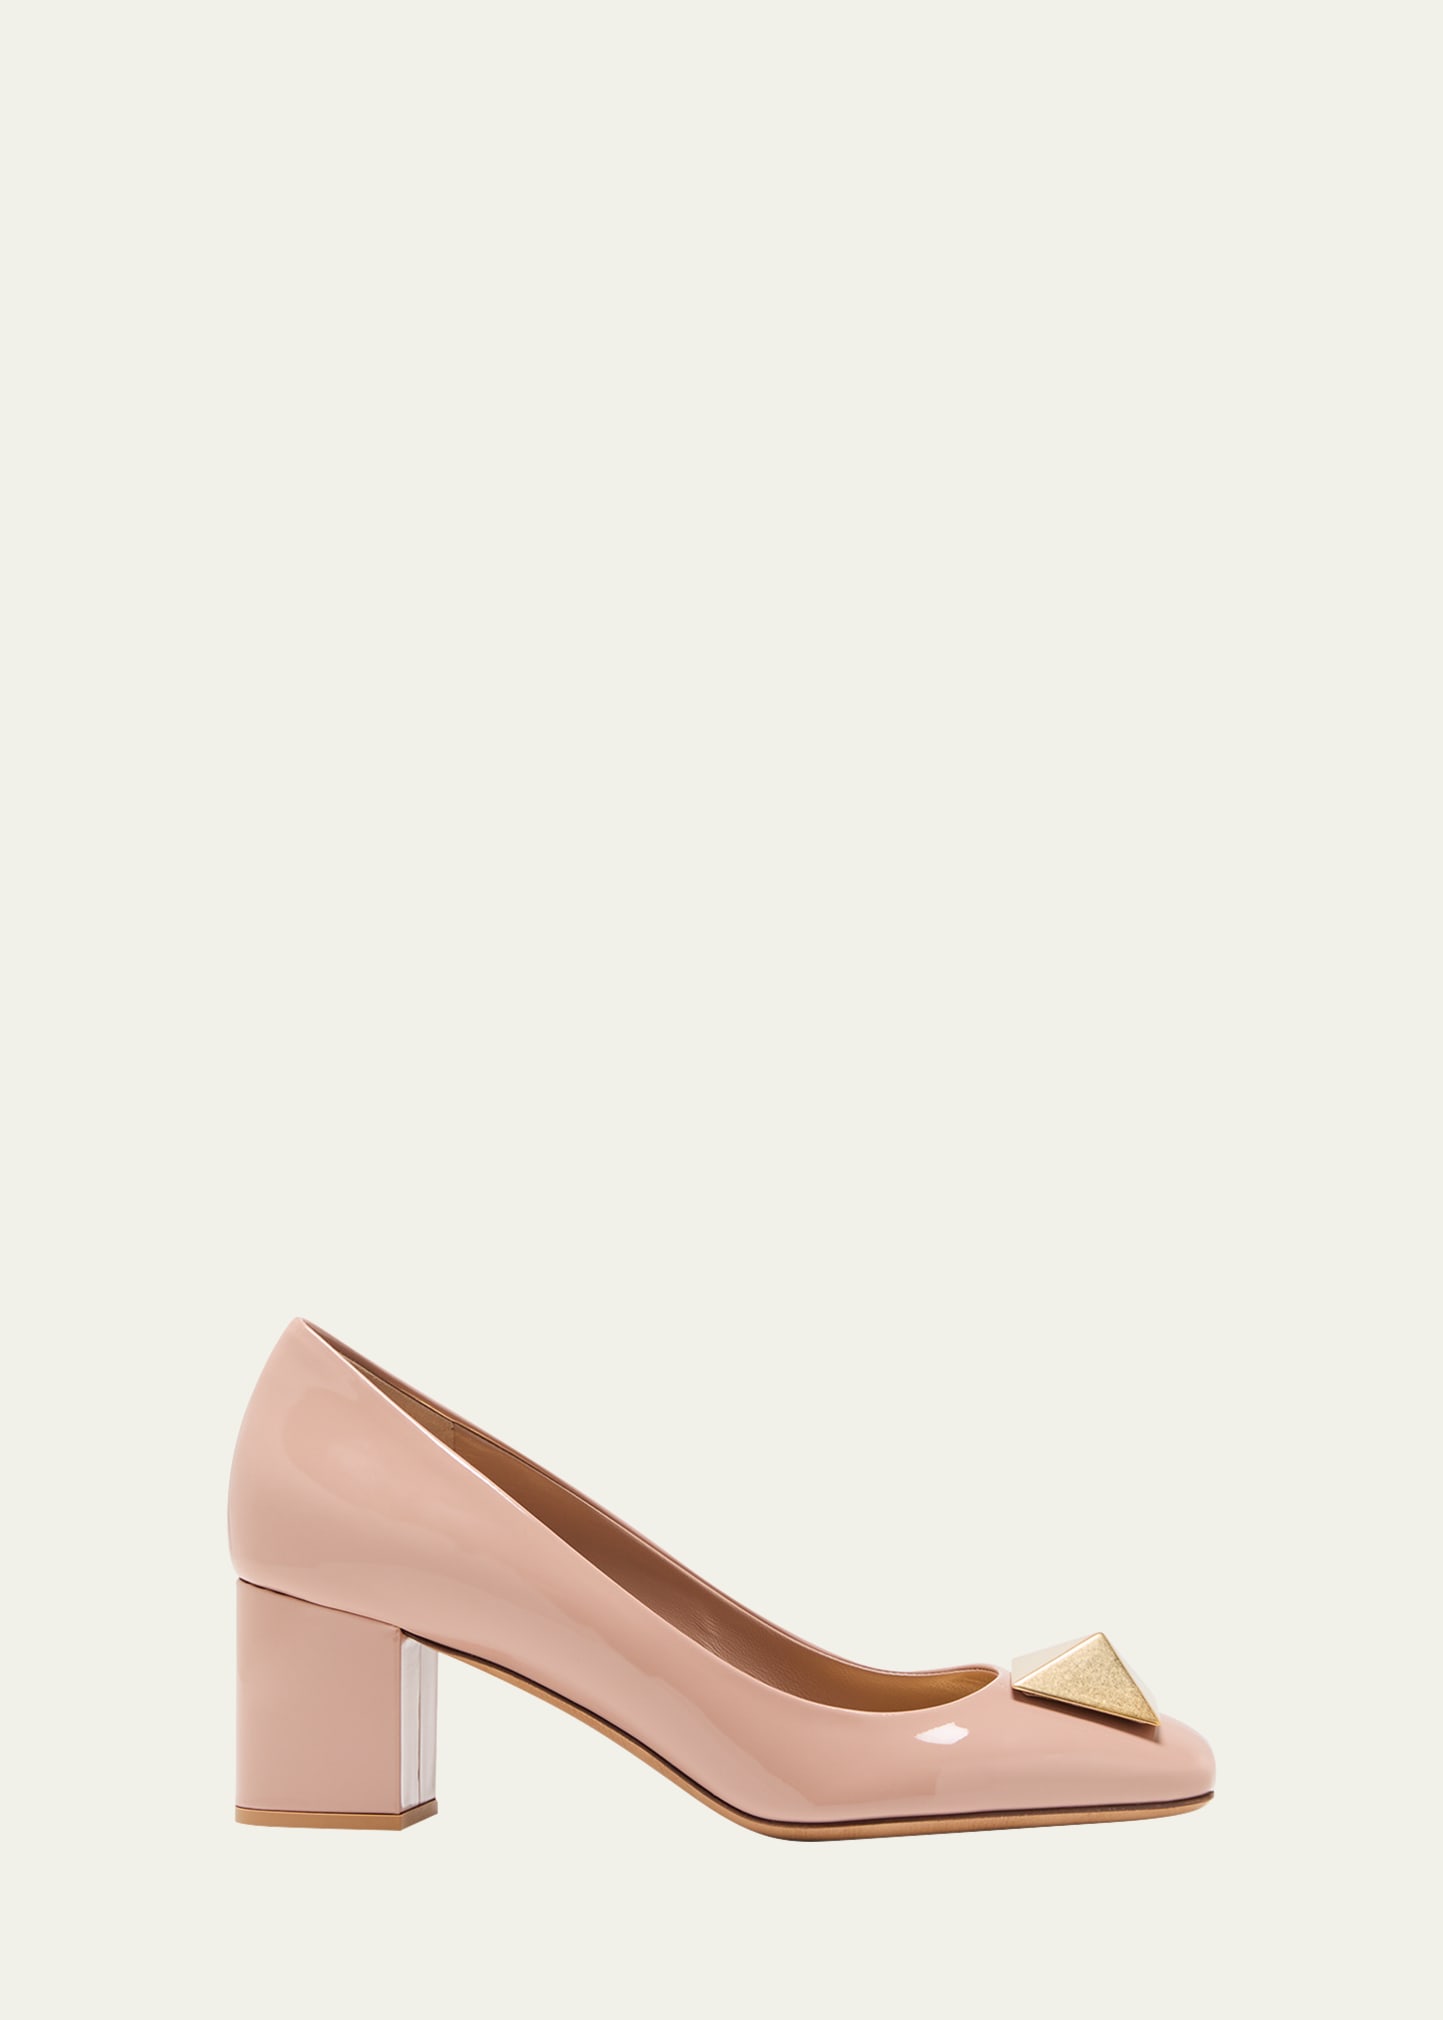 Shop Valentino One Stud Patent Leather Pumps In Gf9 Rose Cannelle